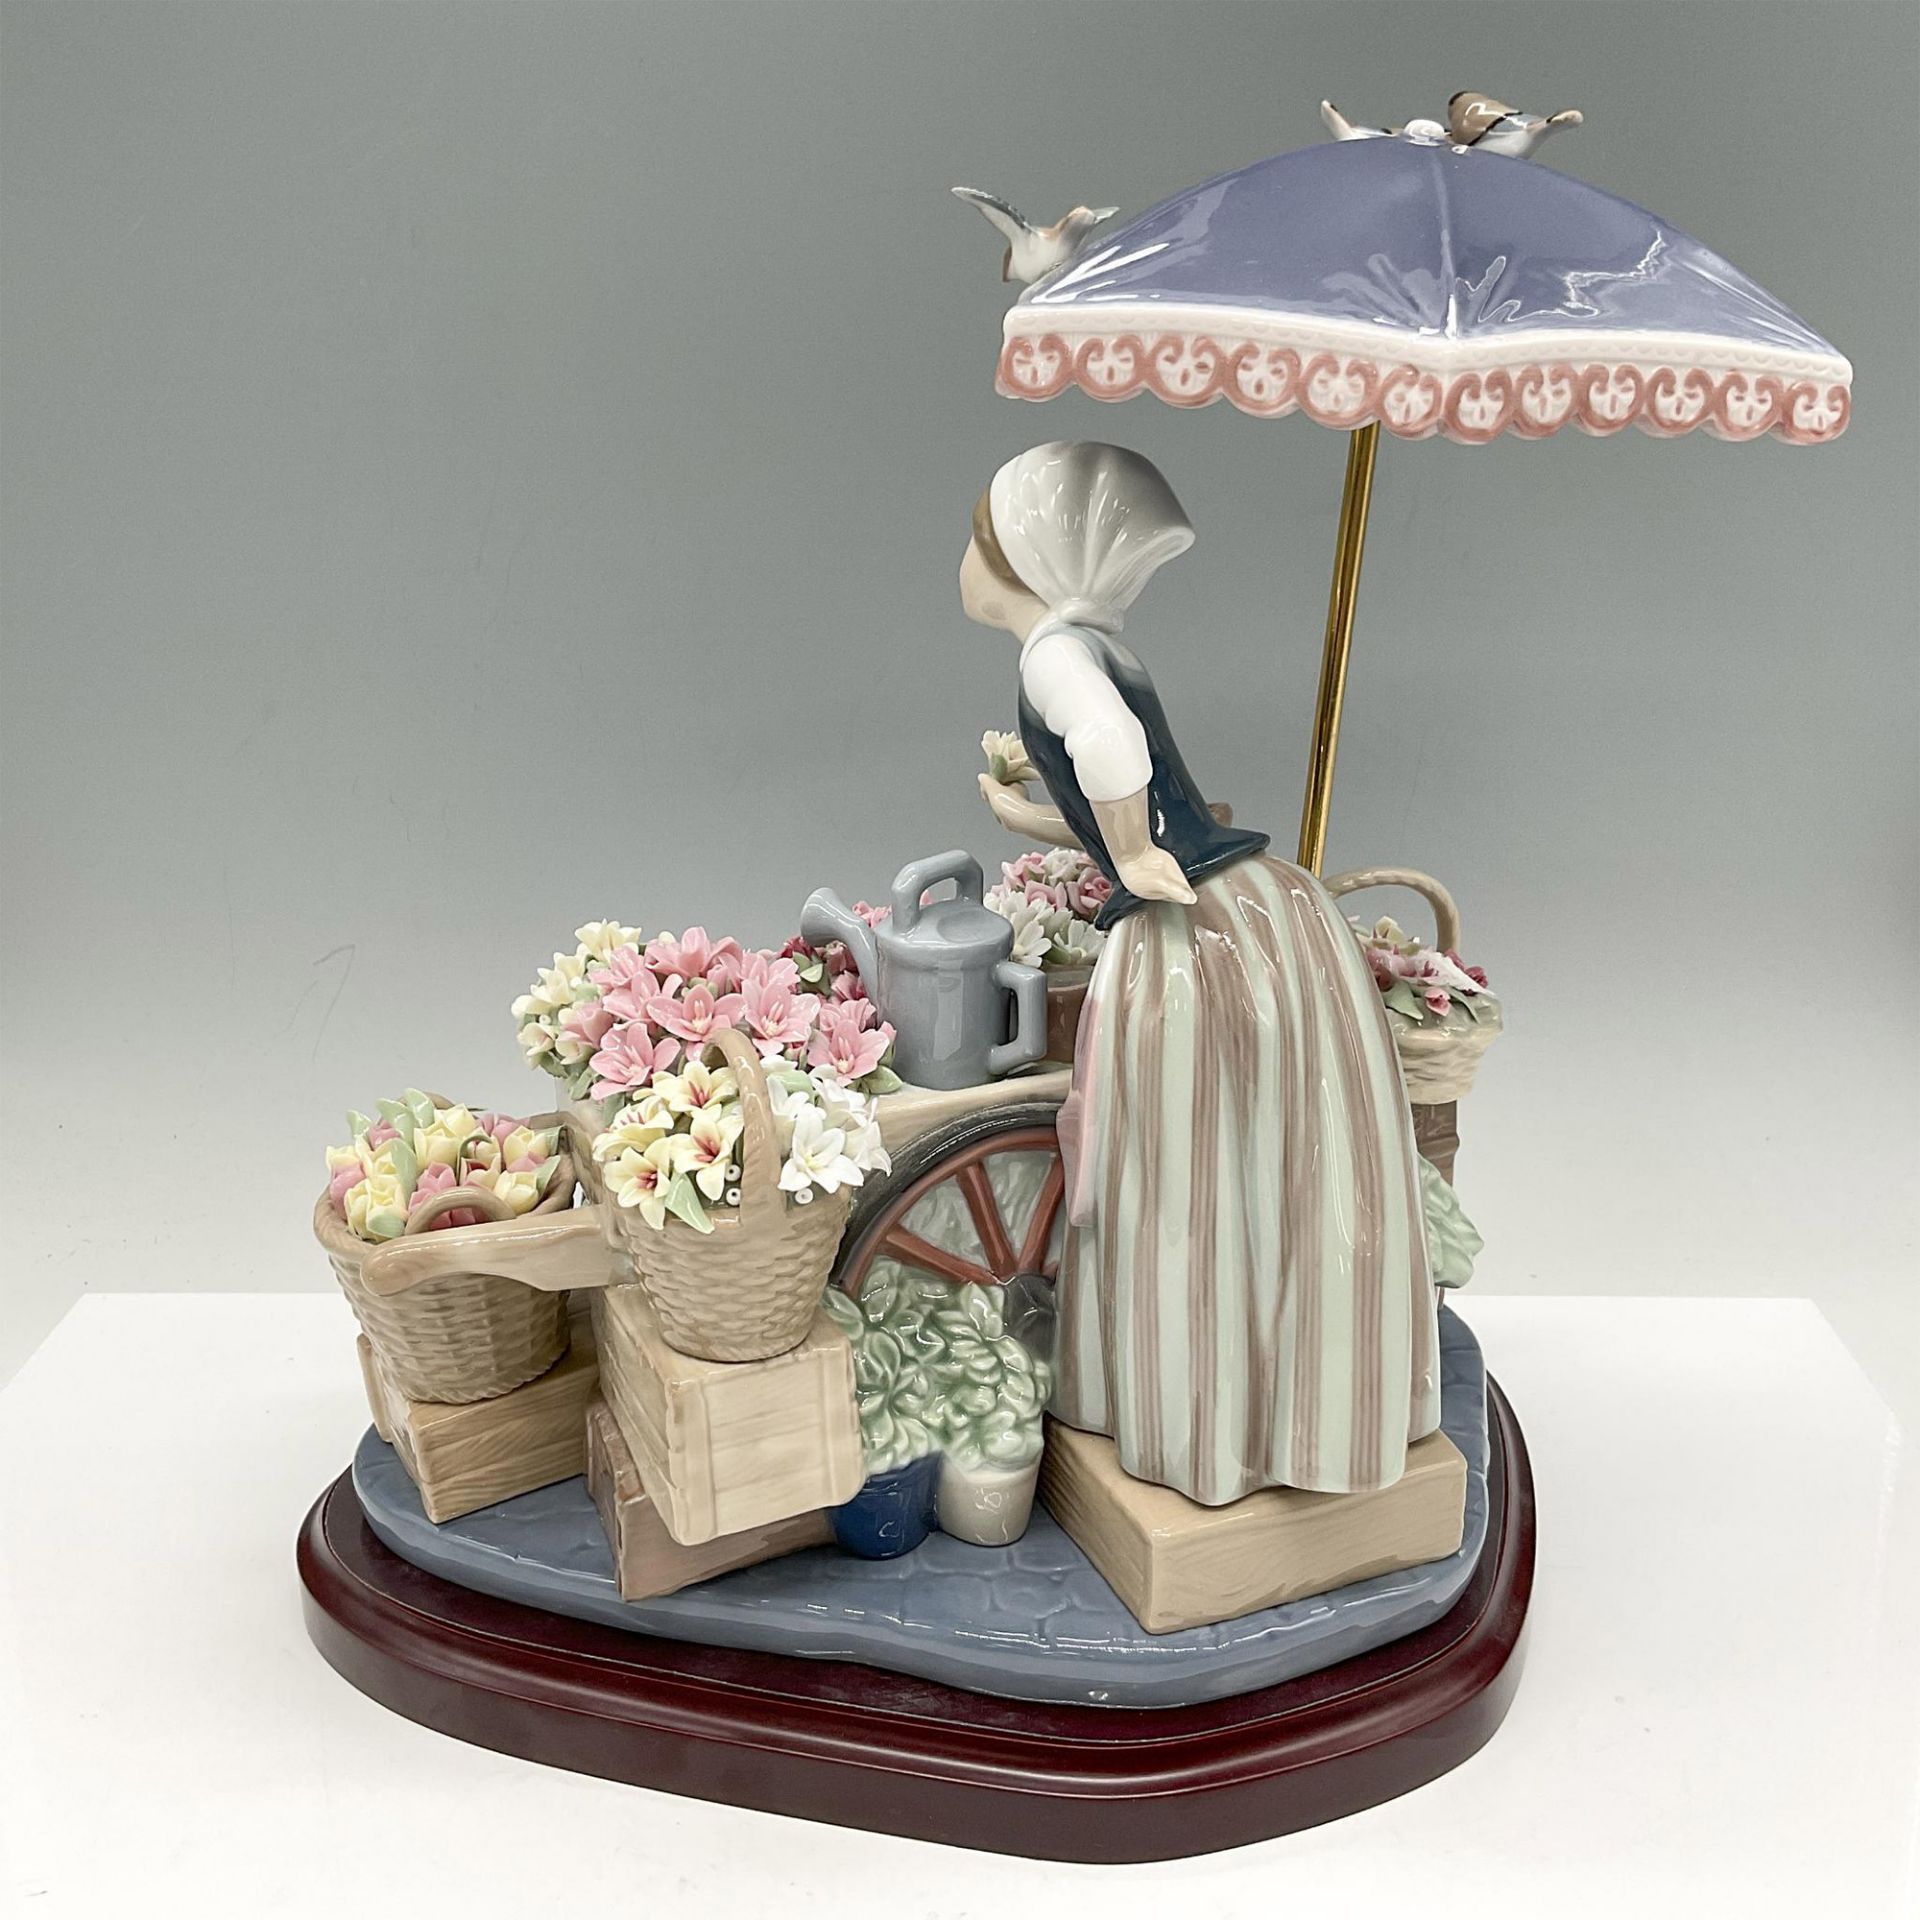 Flowers of the Season 1001454 - Lladro Porcelain Figurine with Base - Image 3 of 4